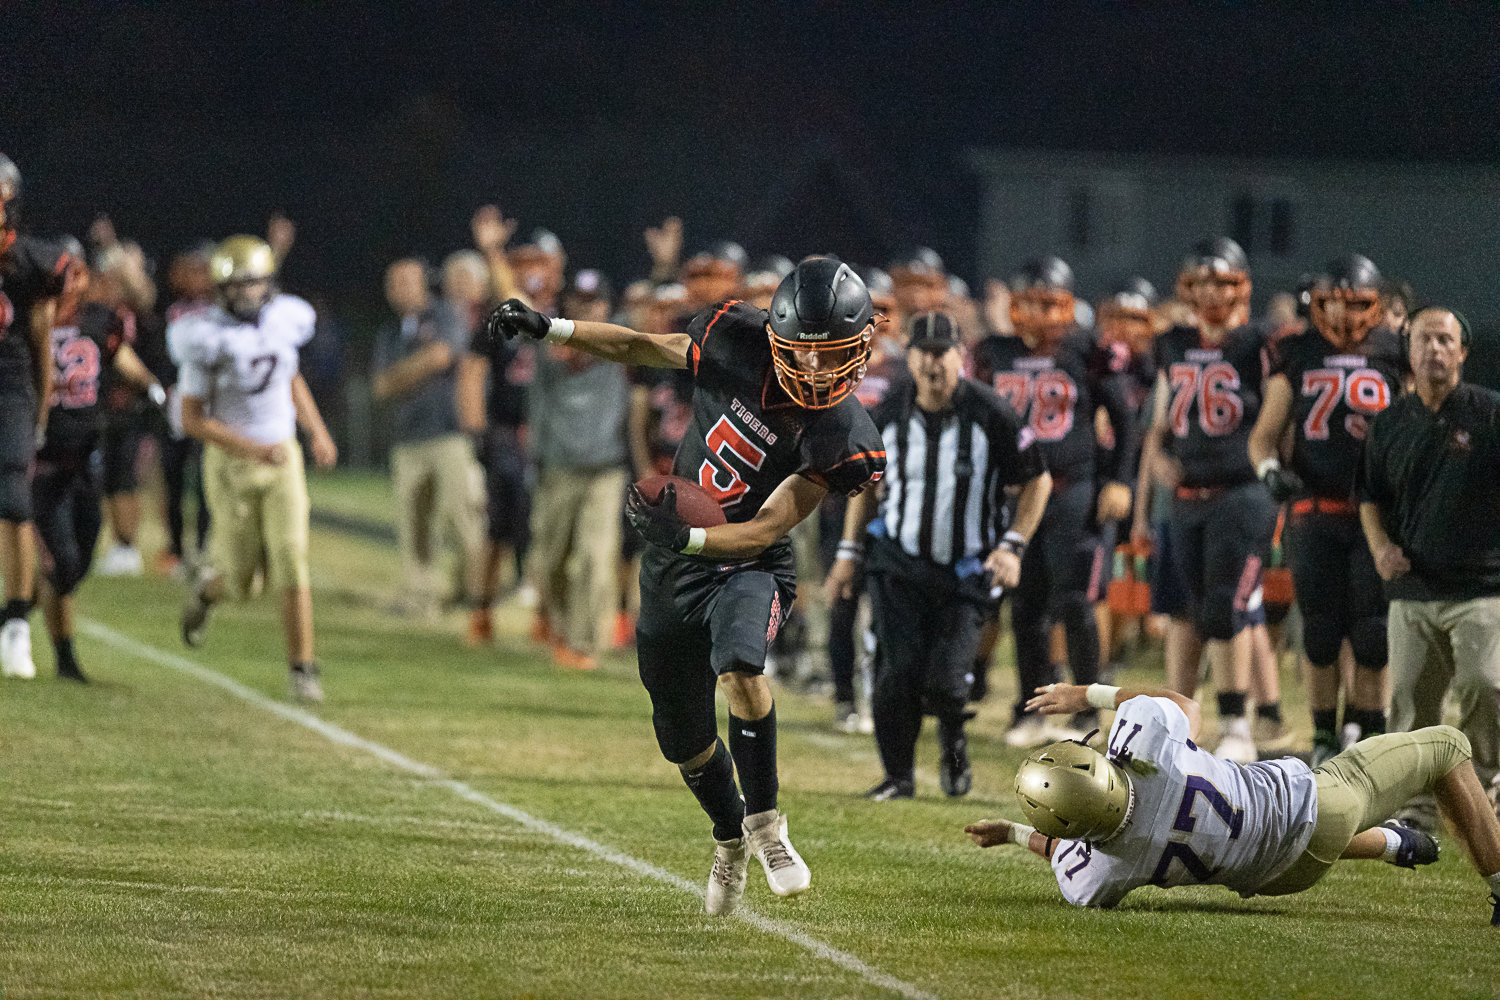 Napavine receiver Karsen Denault tiptoes along the sideline looking to stay in bounds after a catch Sept. 9 against Onalaska.